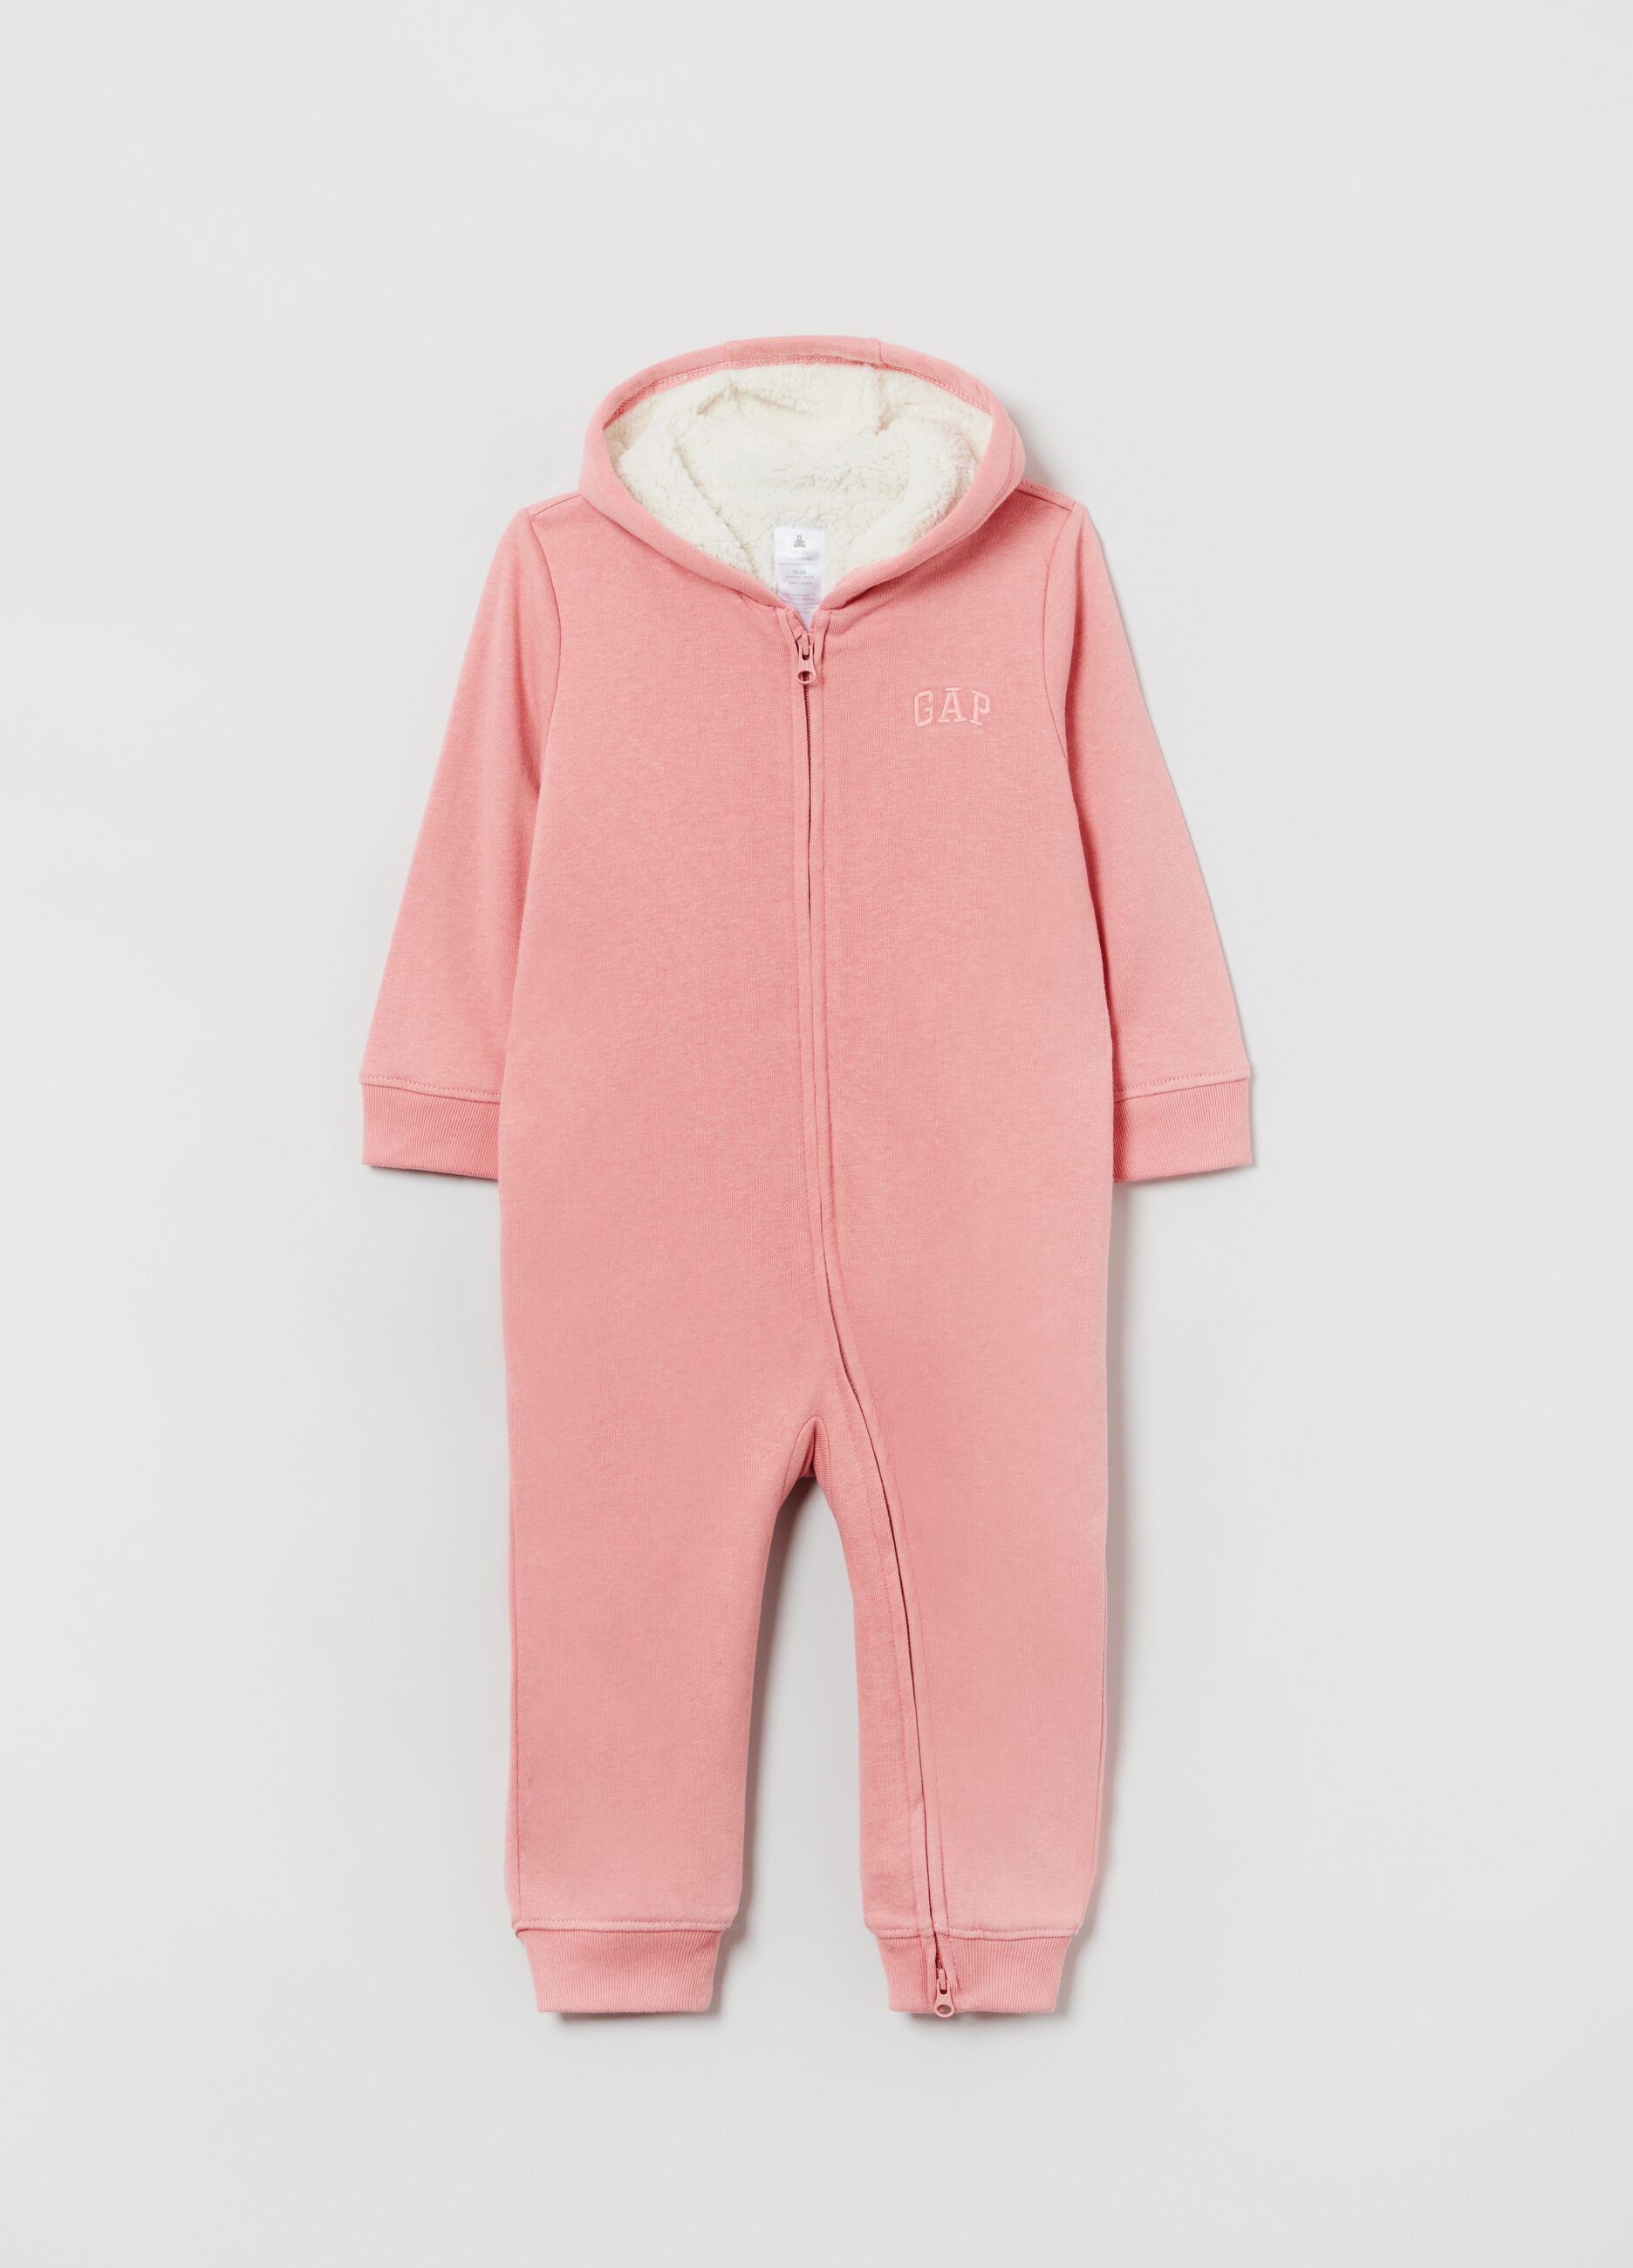 Onesie with hood and sherpa lining.